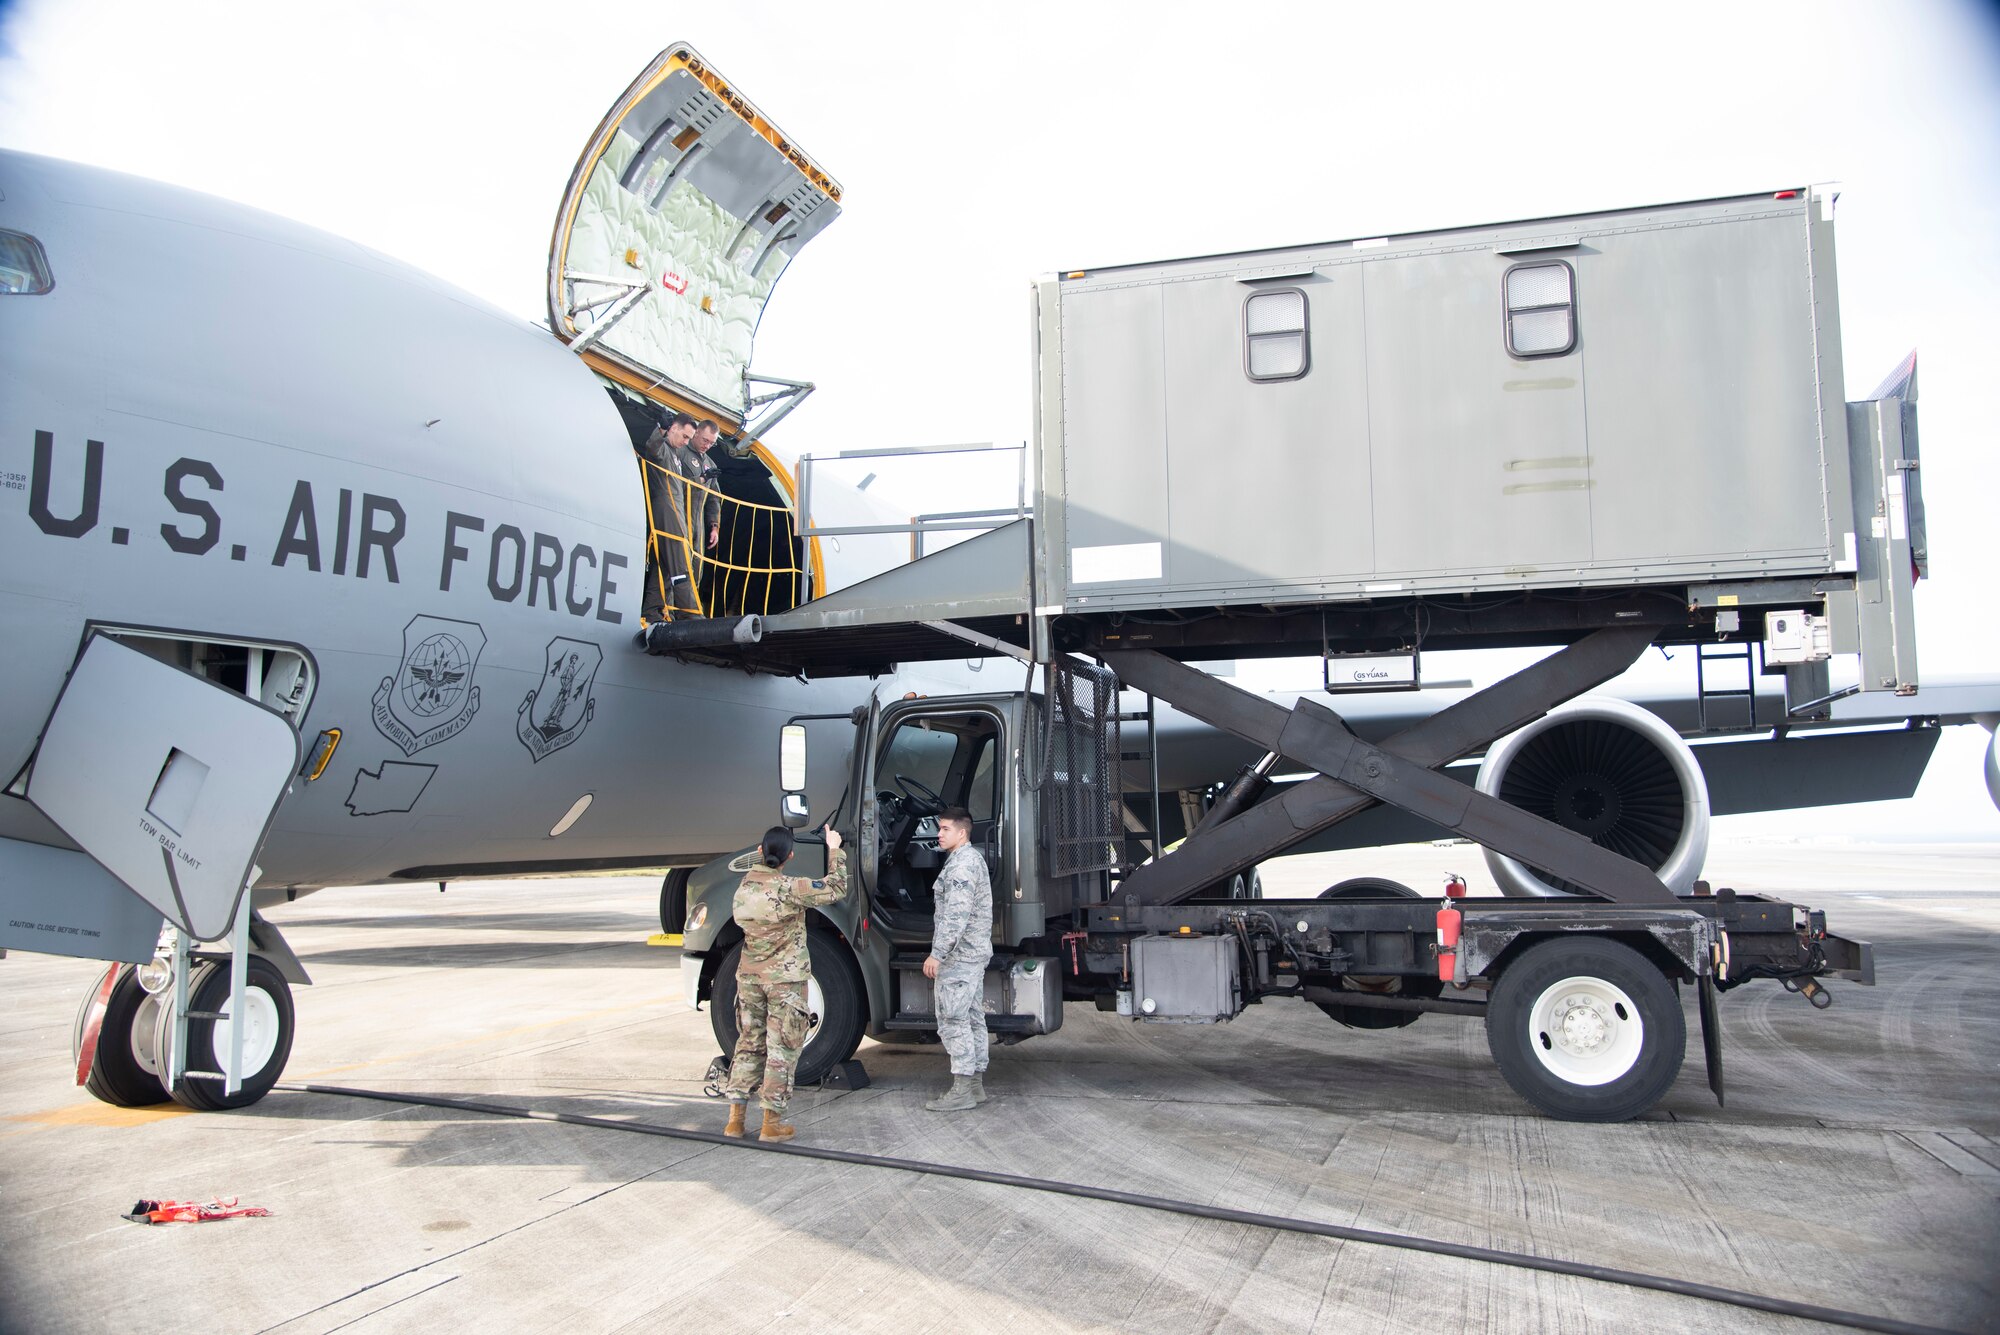 U.S. Air Force Staff Sgt. Justin Cagle, 18th Aeromedical Evacuation Squadron AE technician, directs medical elevator truck Airmen prior to loading medical equipment onto a 384th Air Refueling Squadron KC-135 Stratotanker during an AE exercise near Kadena Air Base, Japan, Feb. 19, 2019. These trucks are a cross between an ambulance and elevator, and are necessary to safely delivering critical care patients and medical equipment onto aircraft. (U.S. Air Force photo by Senior Airman Ryan Lackey)